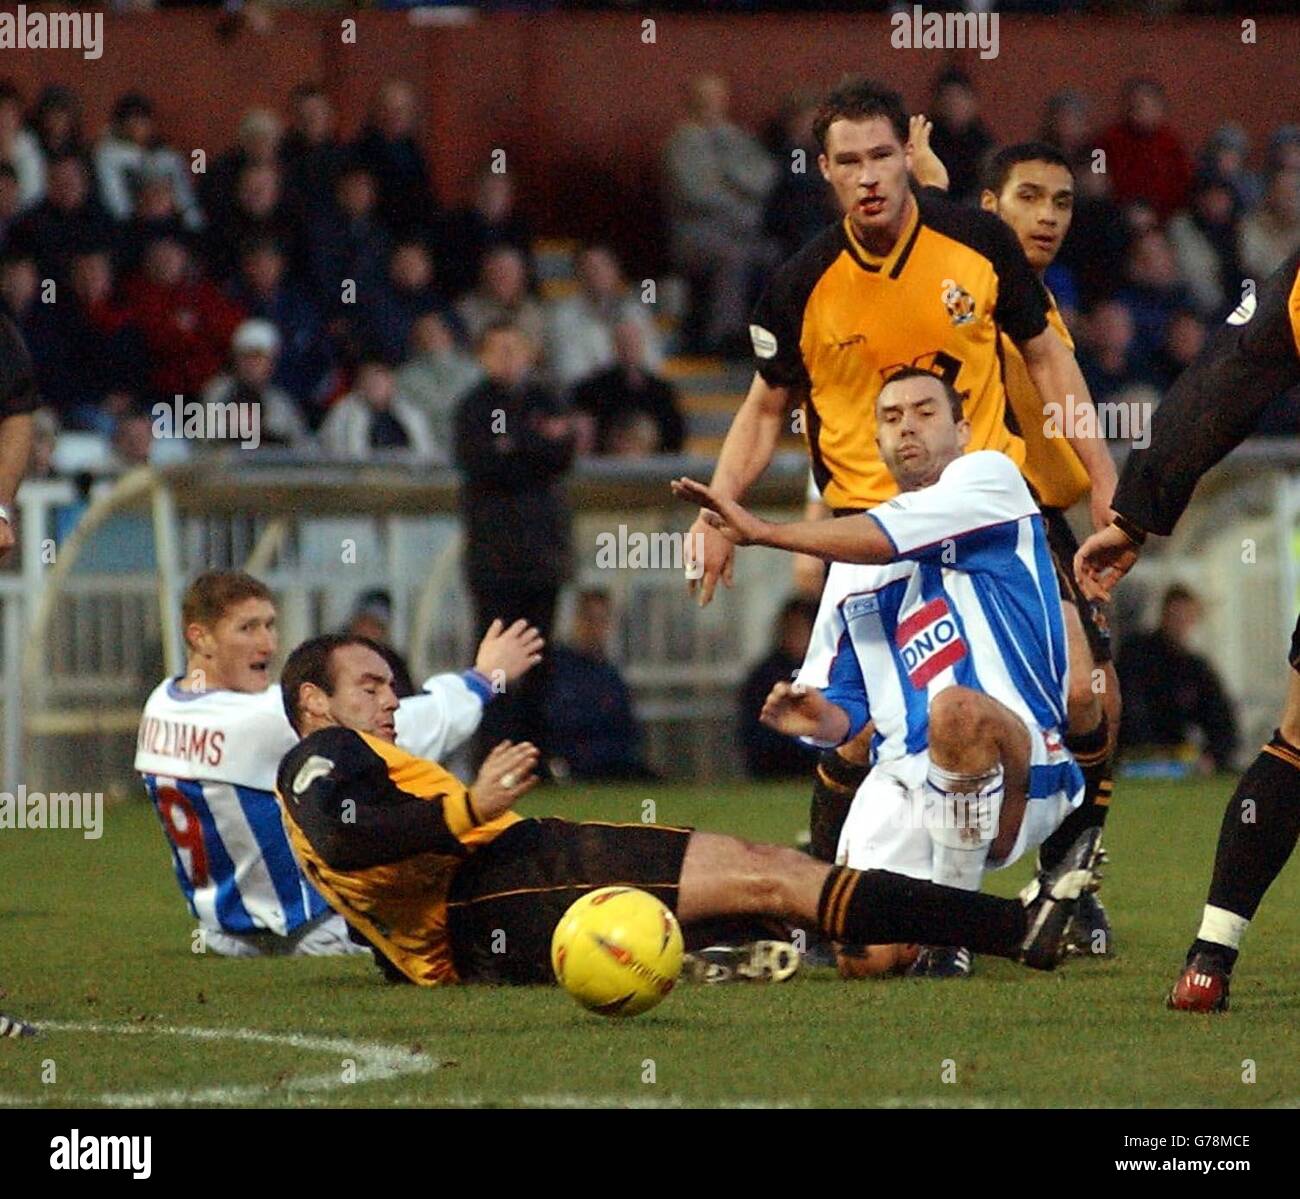 Hartlepool's Tommy Widdrington slides the ball past Cambridge United's Shane Tudor during their Nationwide Division Three match at Hartlepool's Victoria Park ground. . Stock Photo